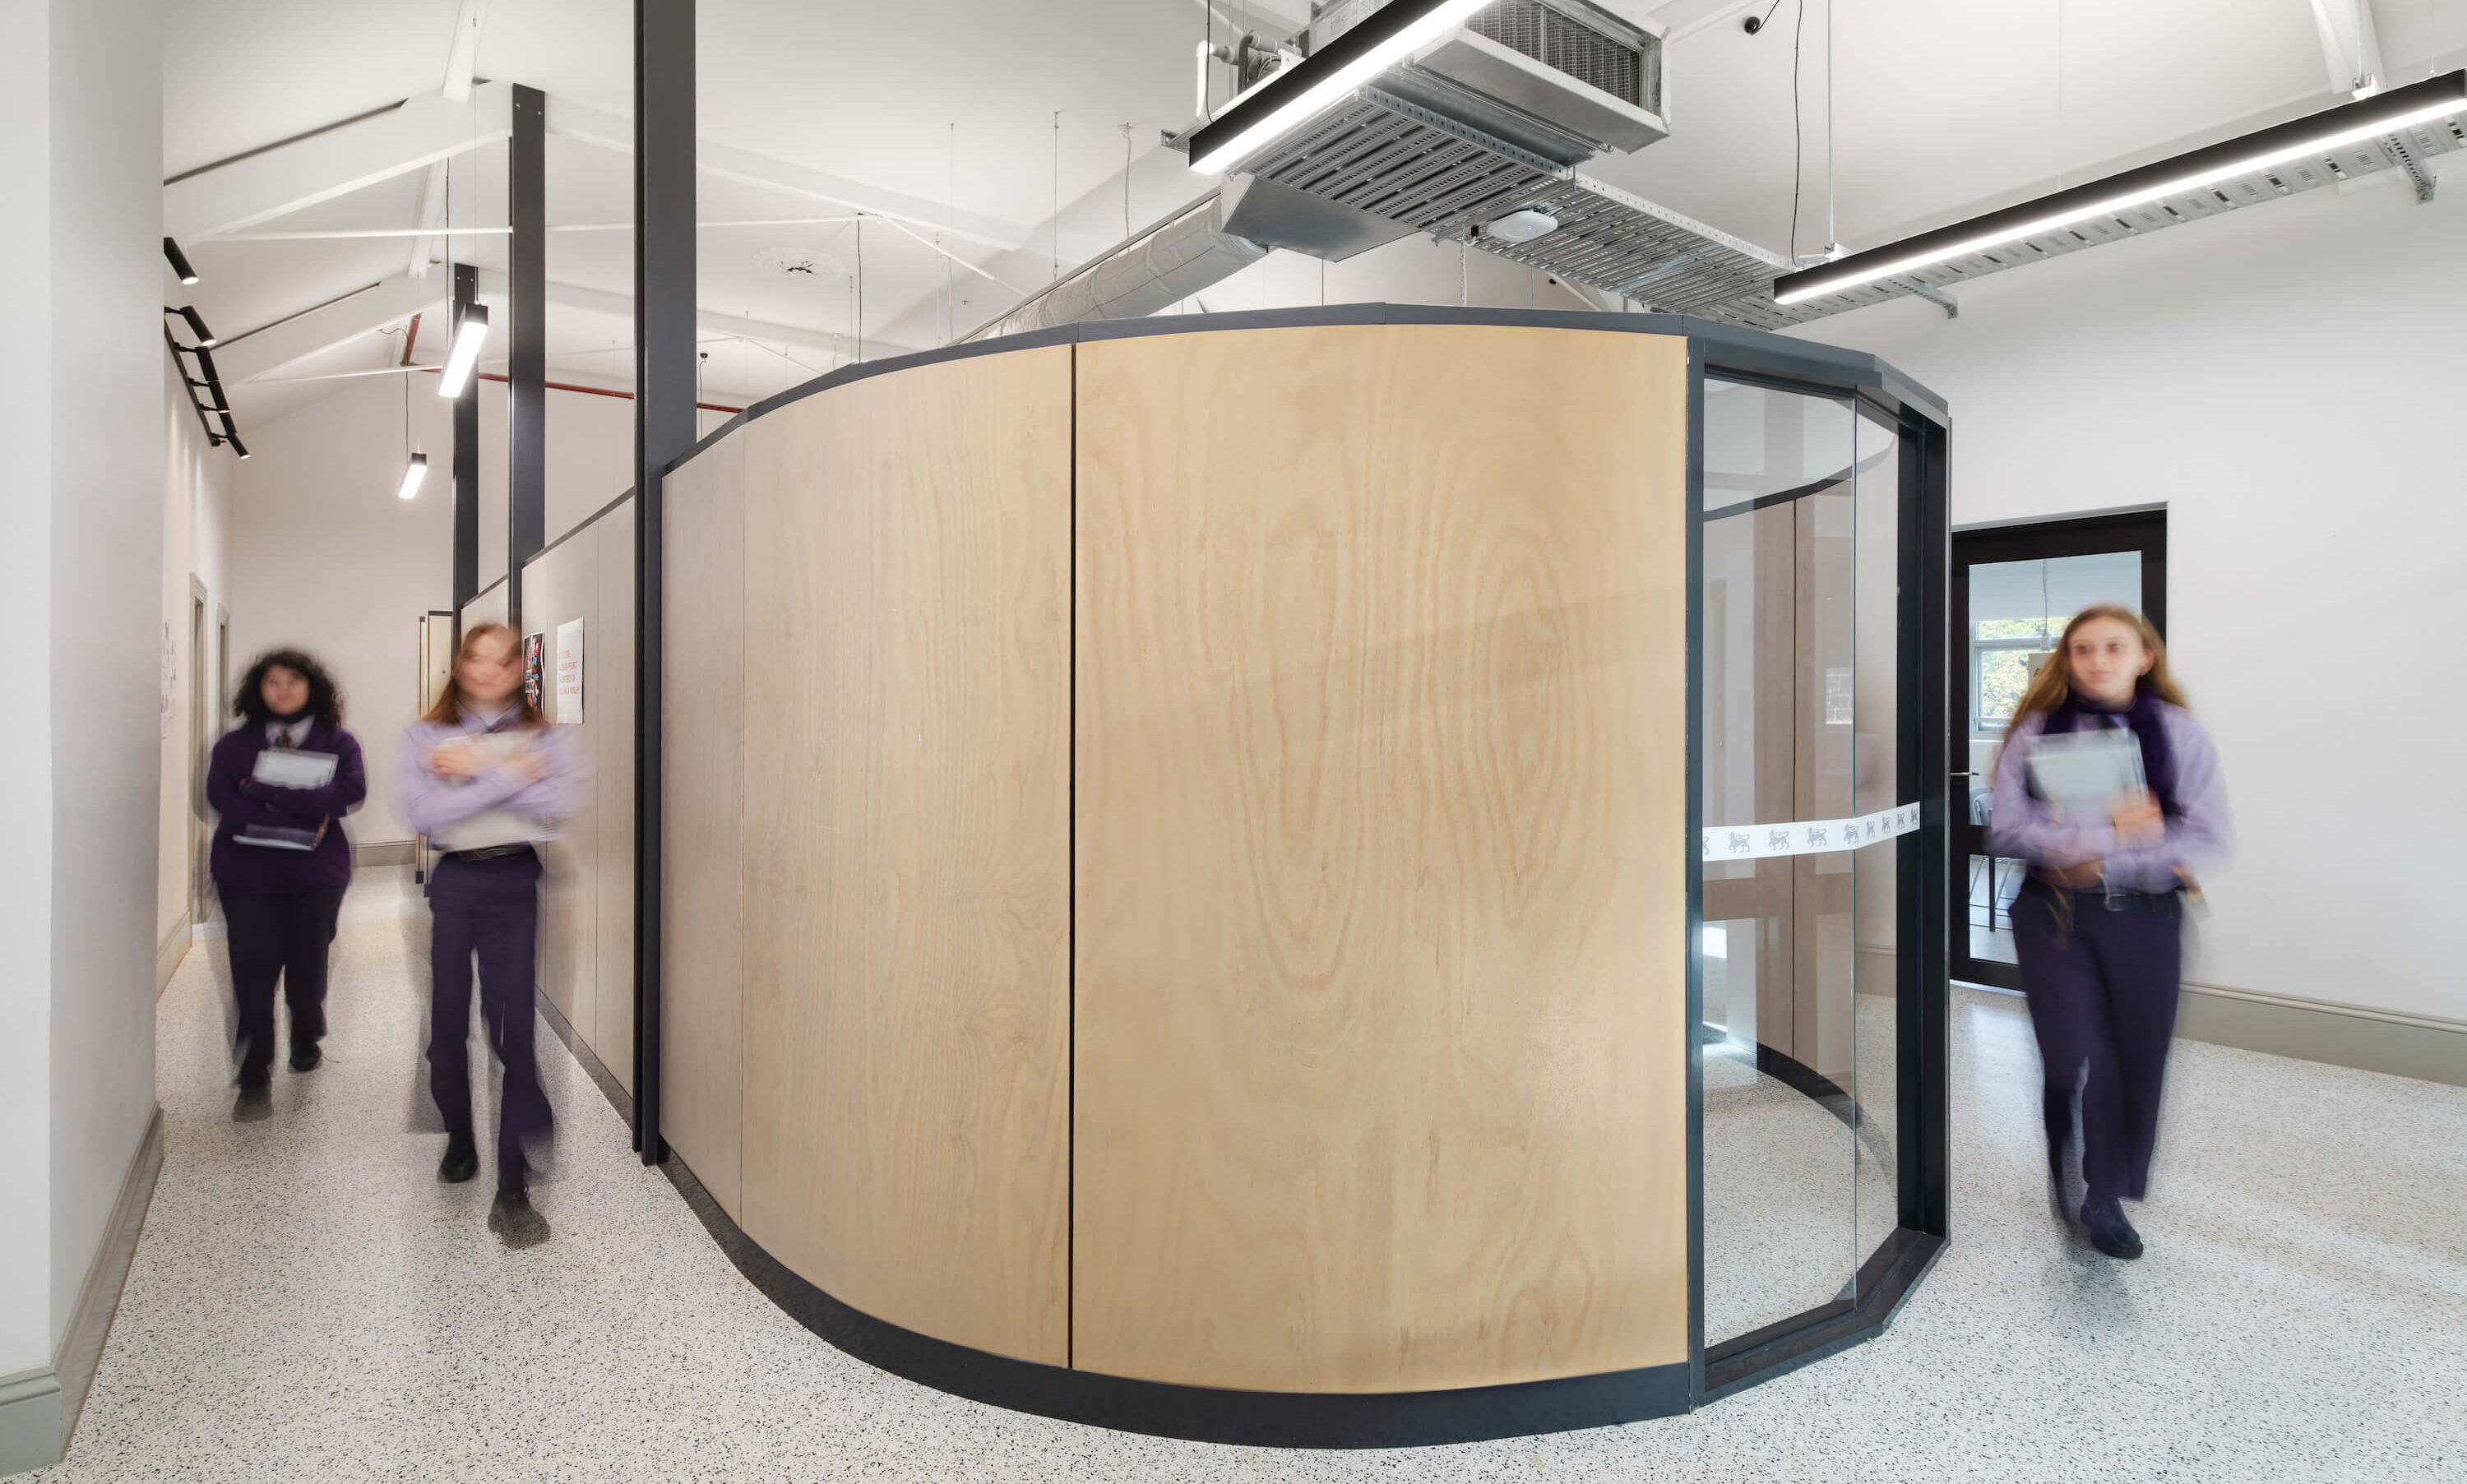 Students round a contemporary central pod in a heritage building